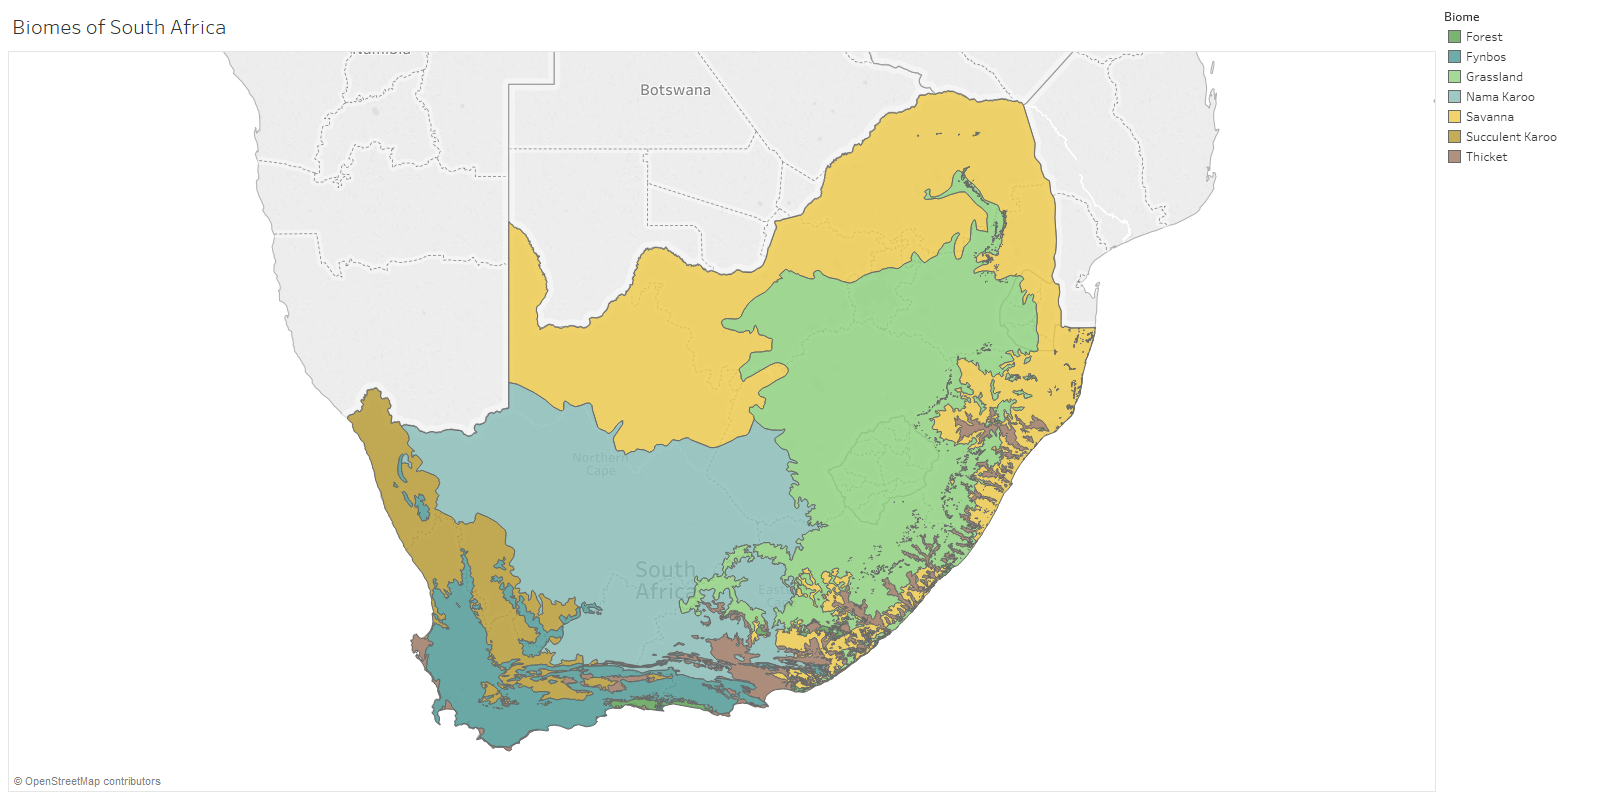 biomes of south africa Tableau geospatial visualization